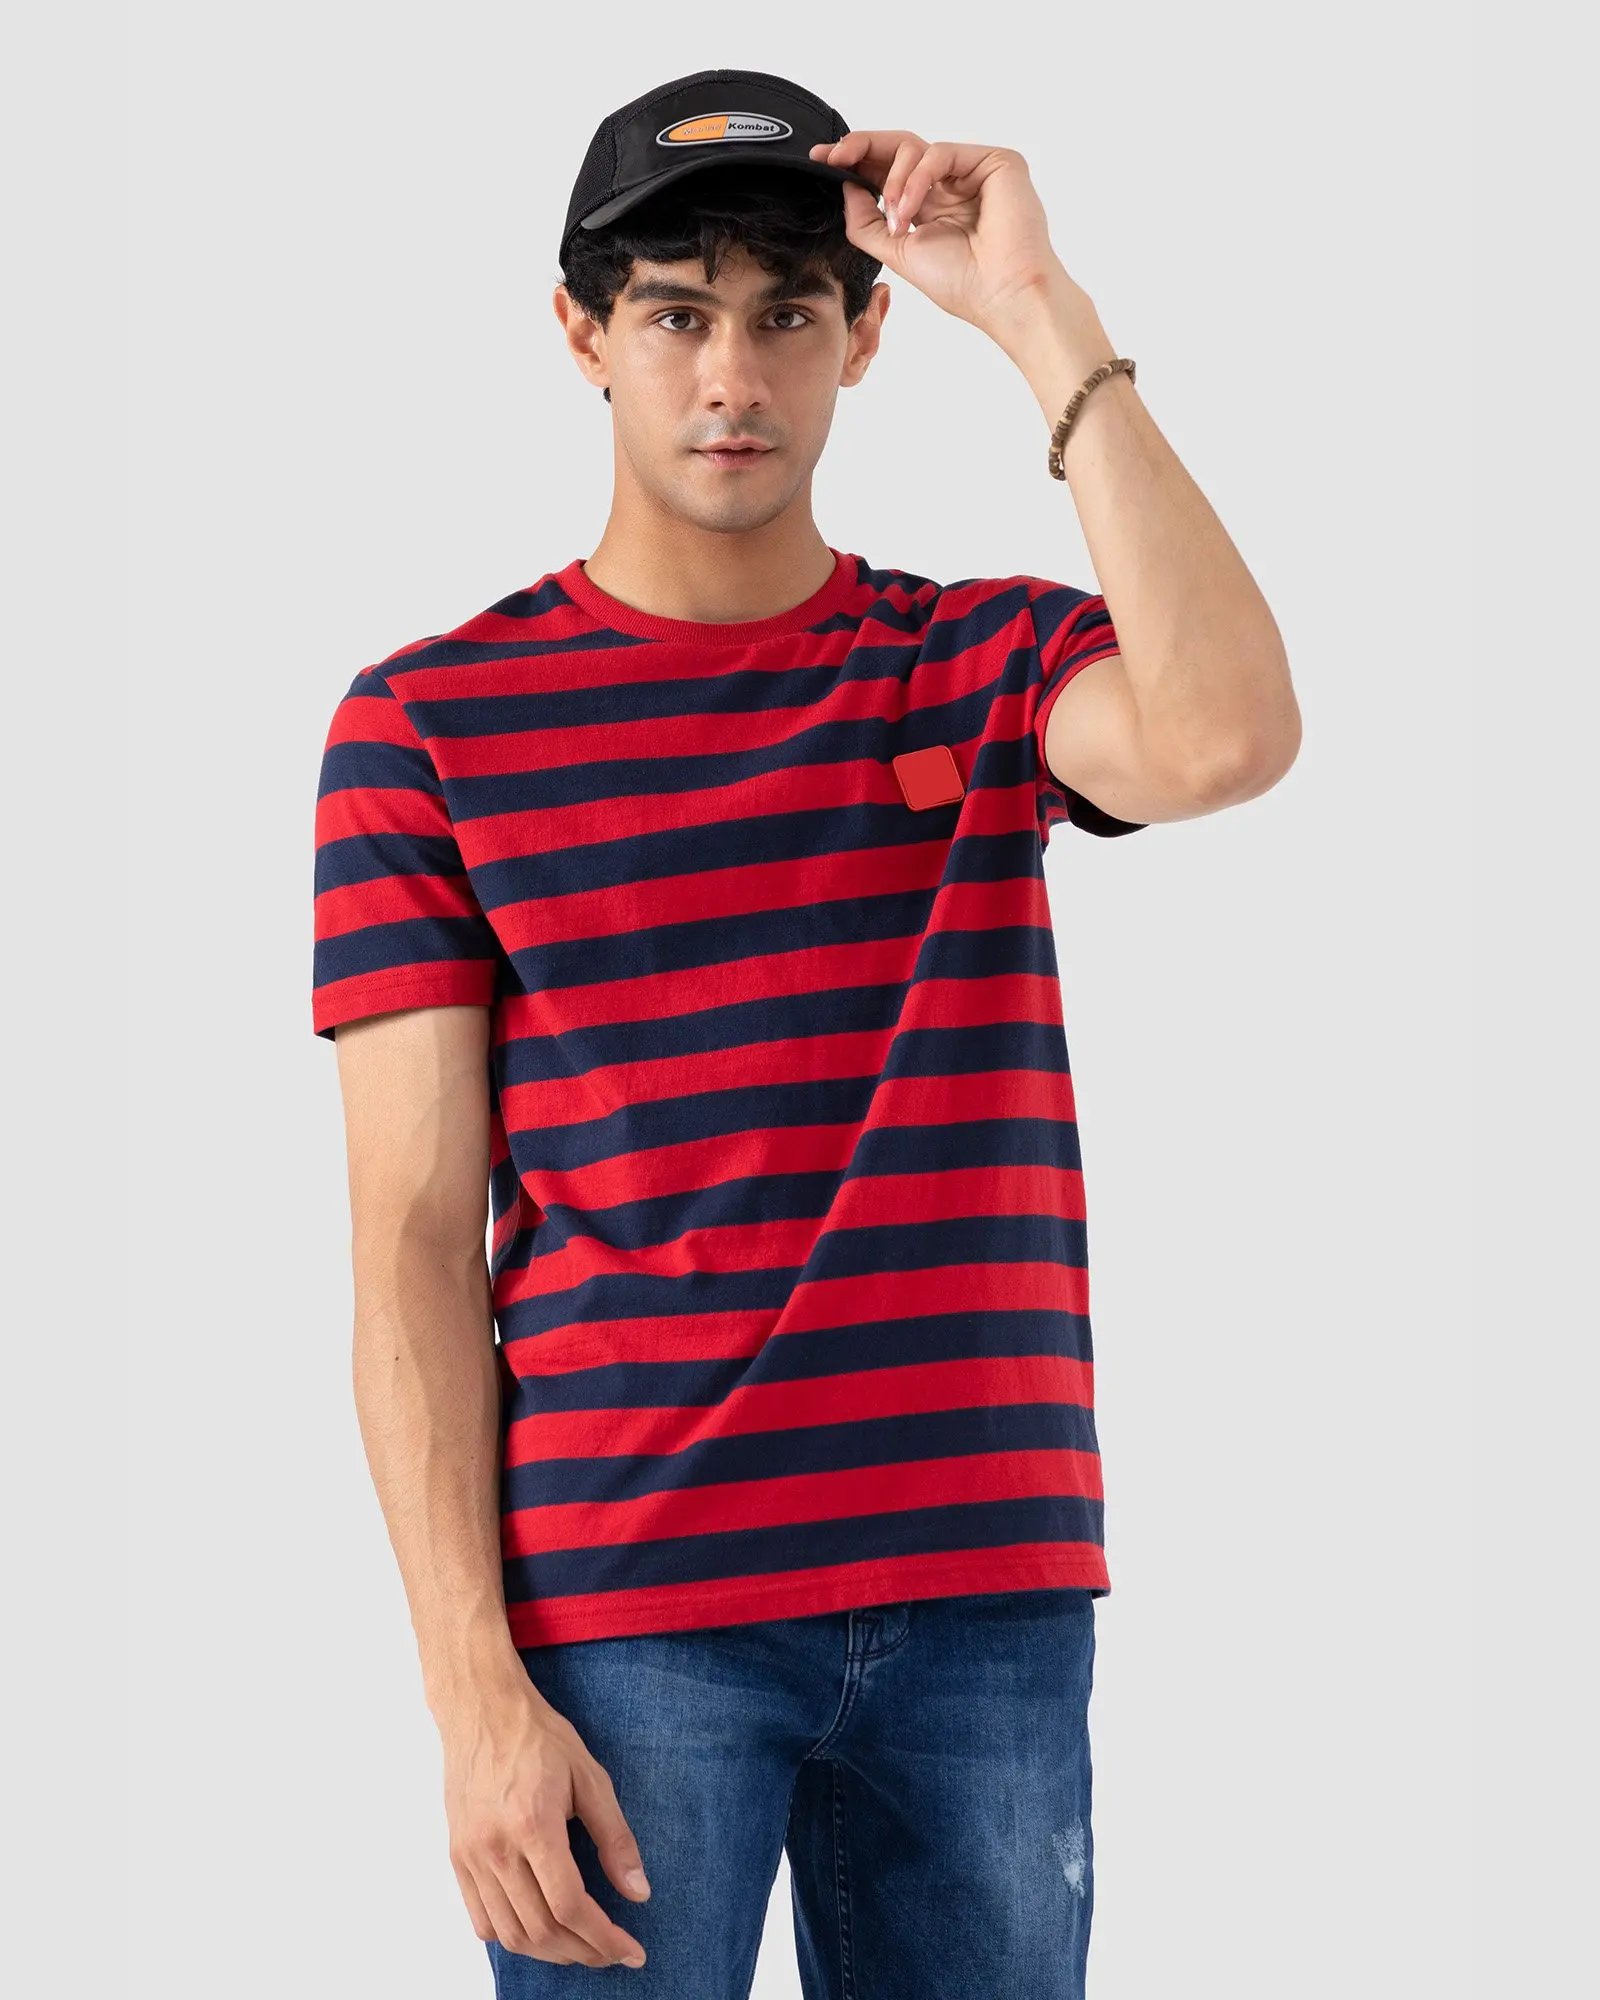 Short-Sleeved Man Stripe T-shirt For Male Clothing Round-Collar Tops Tees